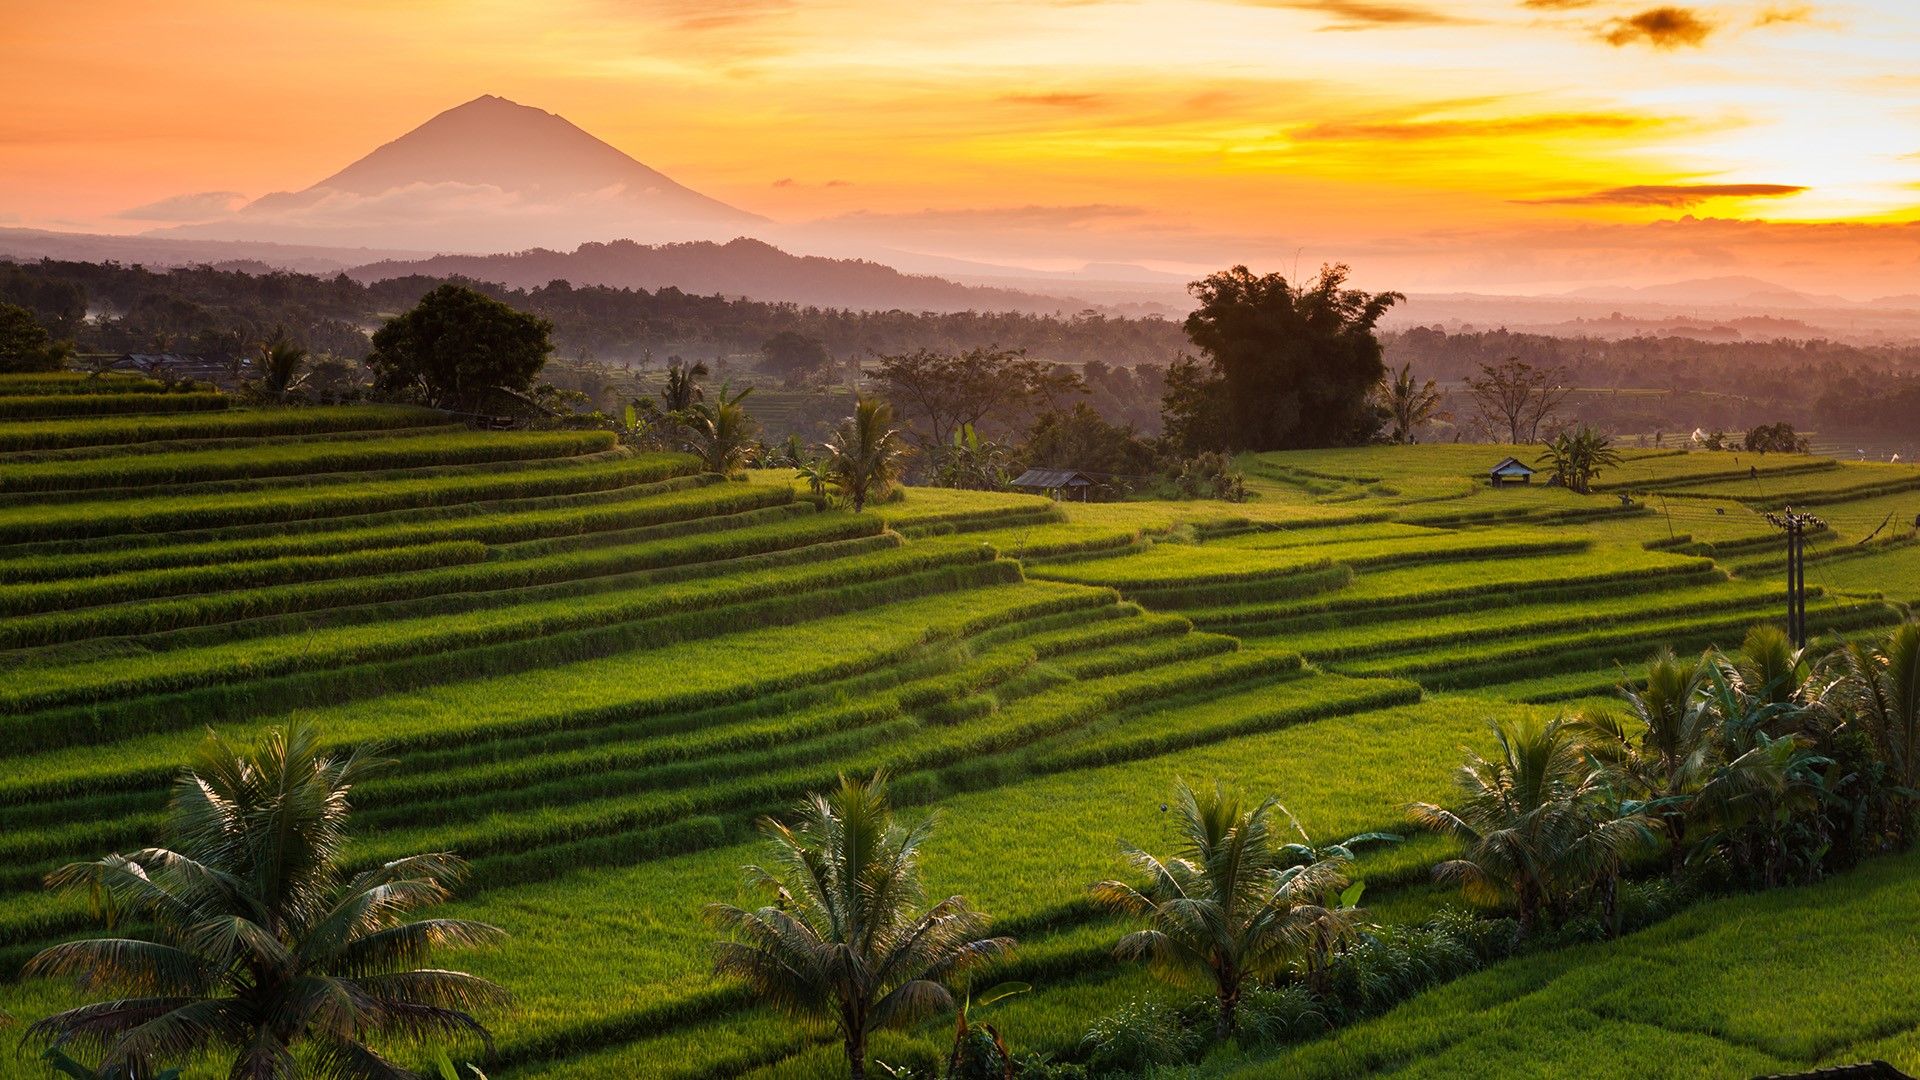 Wallpaper, nature, landscape, mountains, trees, field, sky, sunset, clouds, far view, Rice Terrace, Bali, Indonesia 1920x1080